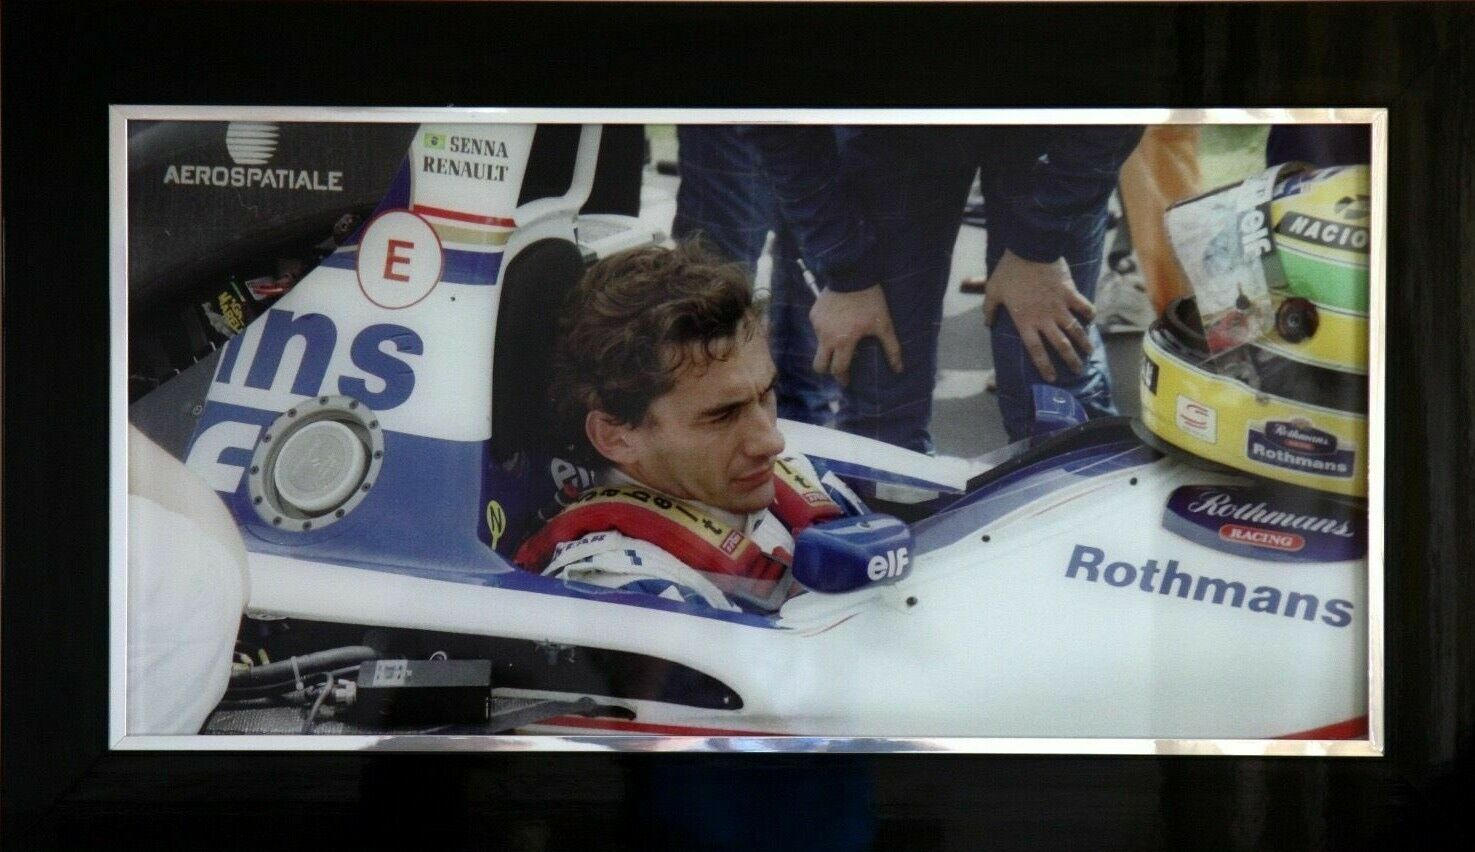 Aryton Senna - The Final Picture (Limited Edition) - Framed - Titled - Numbered